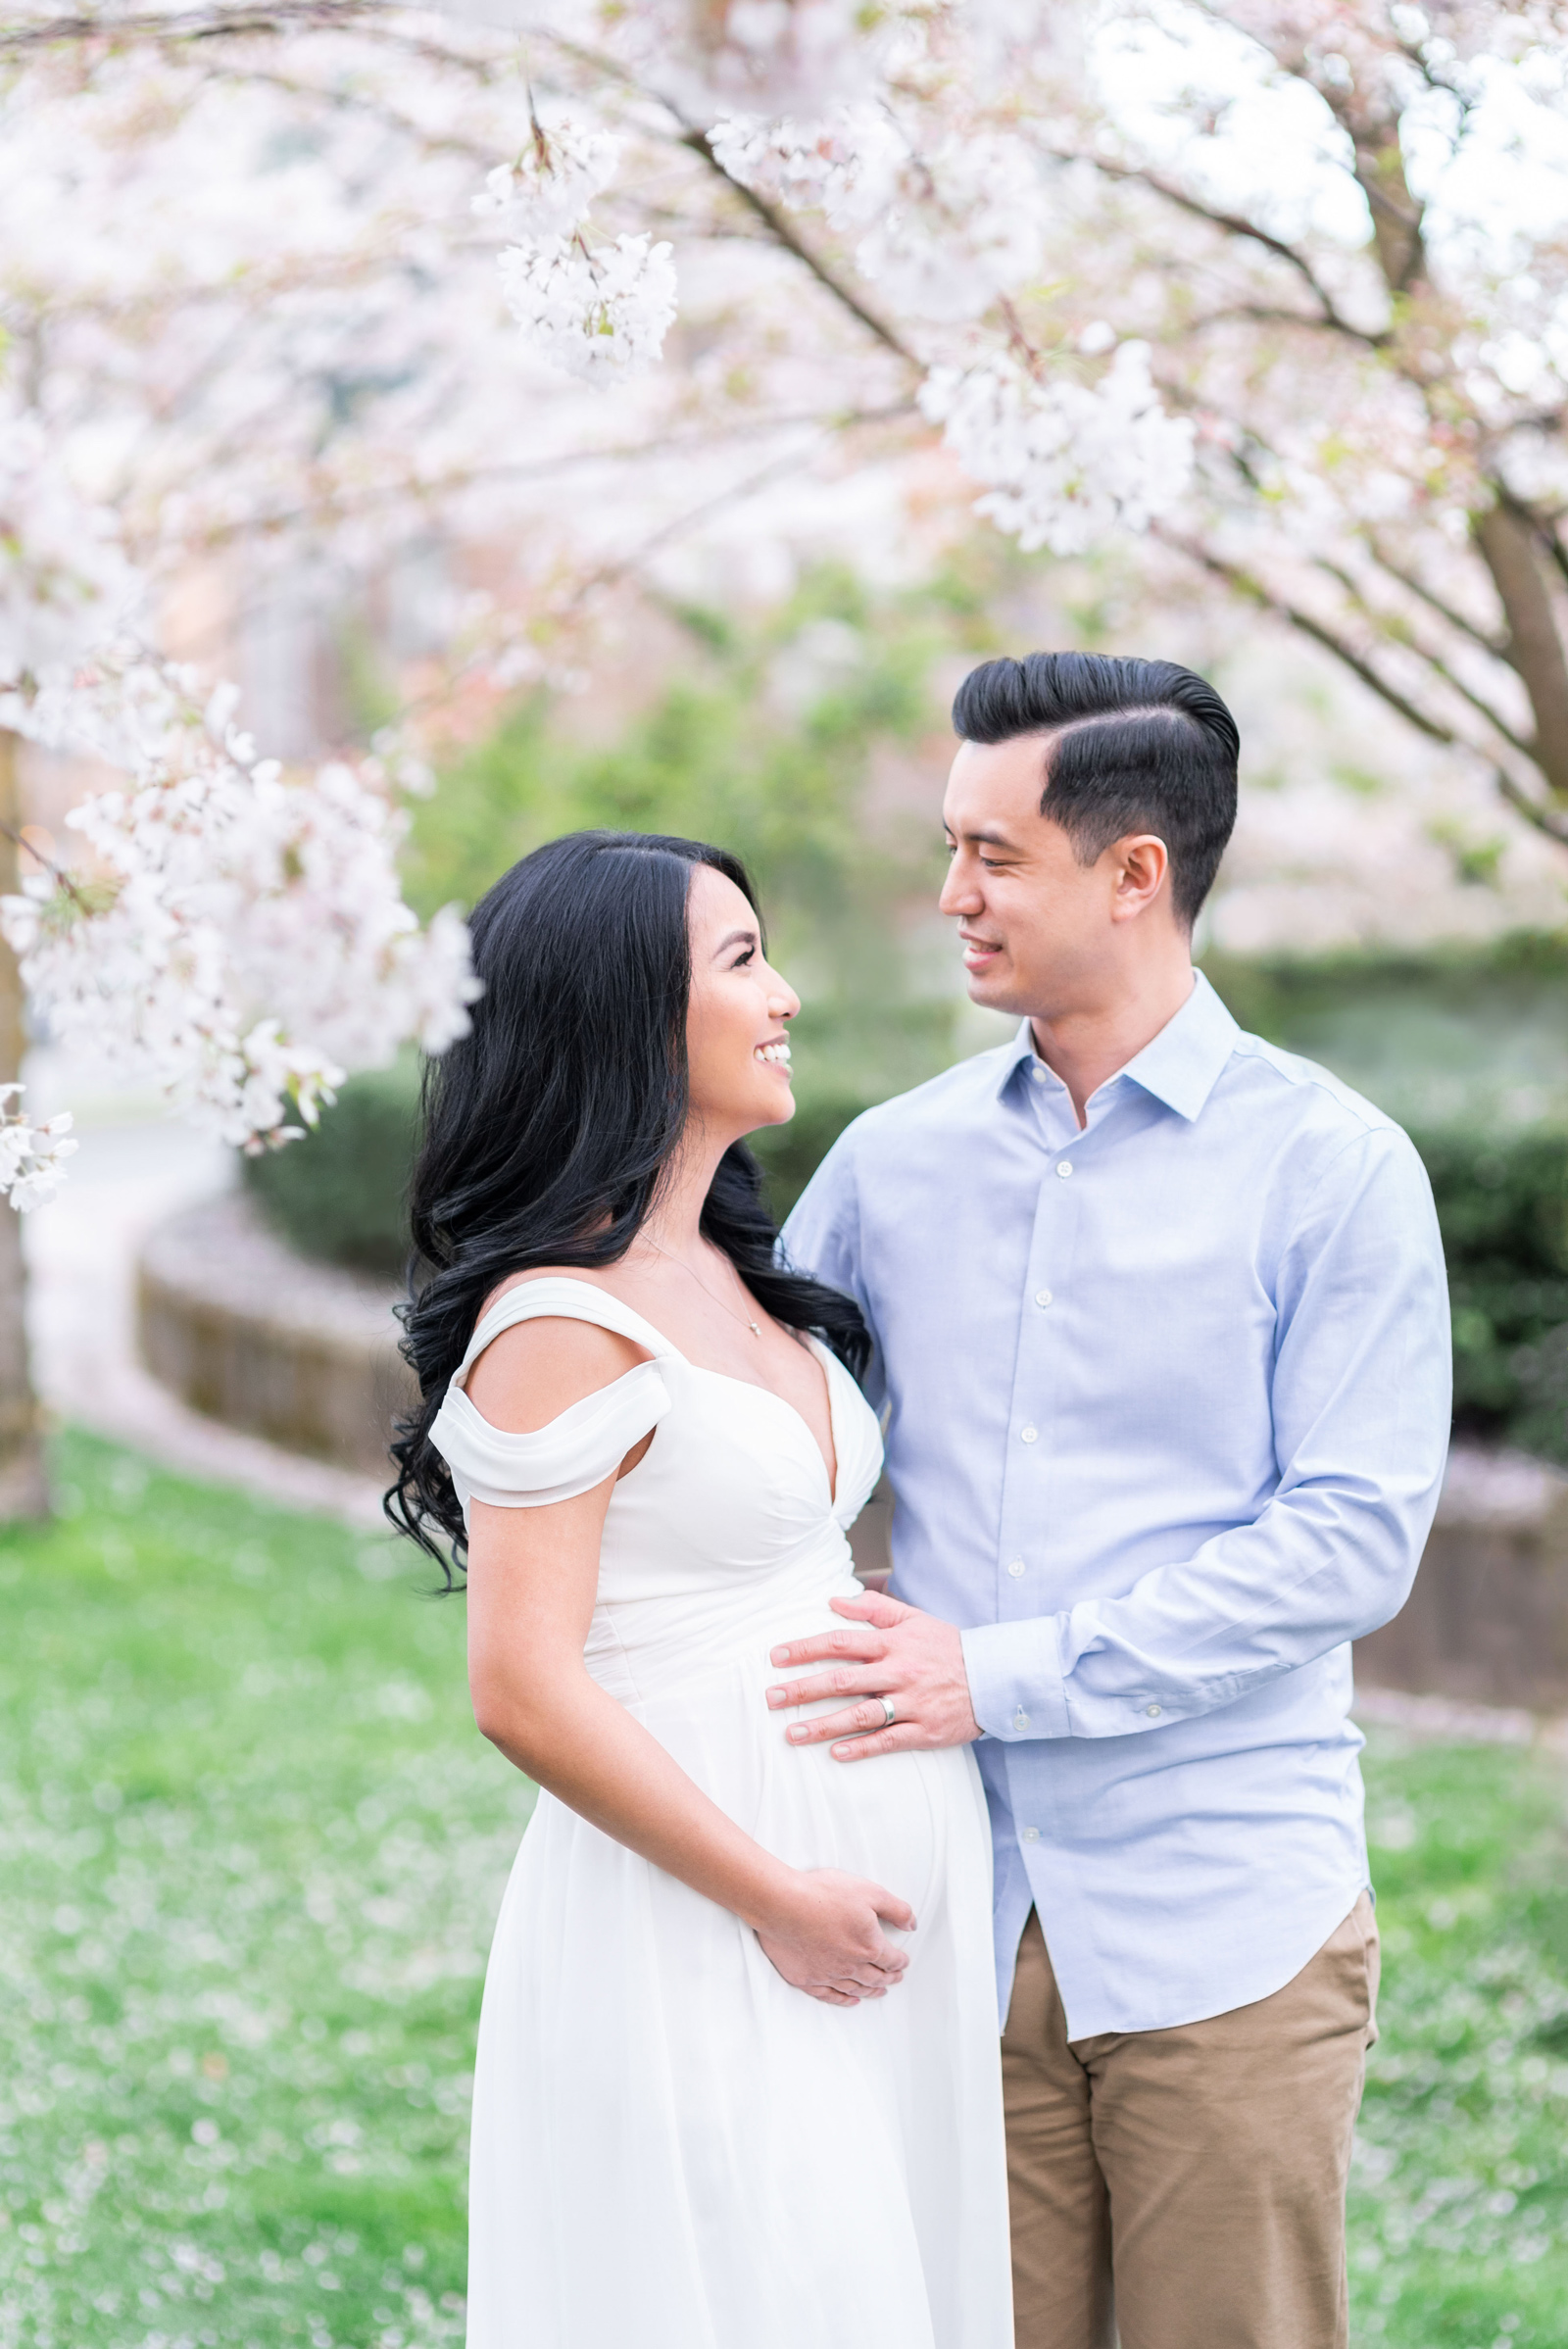 Cute pregnant Asian couple laughing in a cherry blossom park